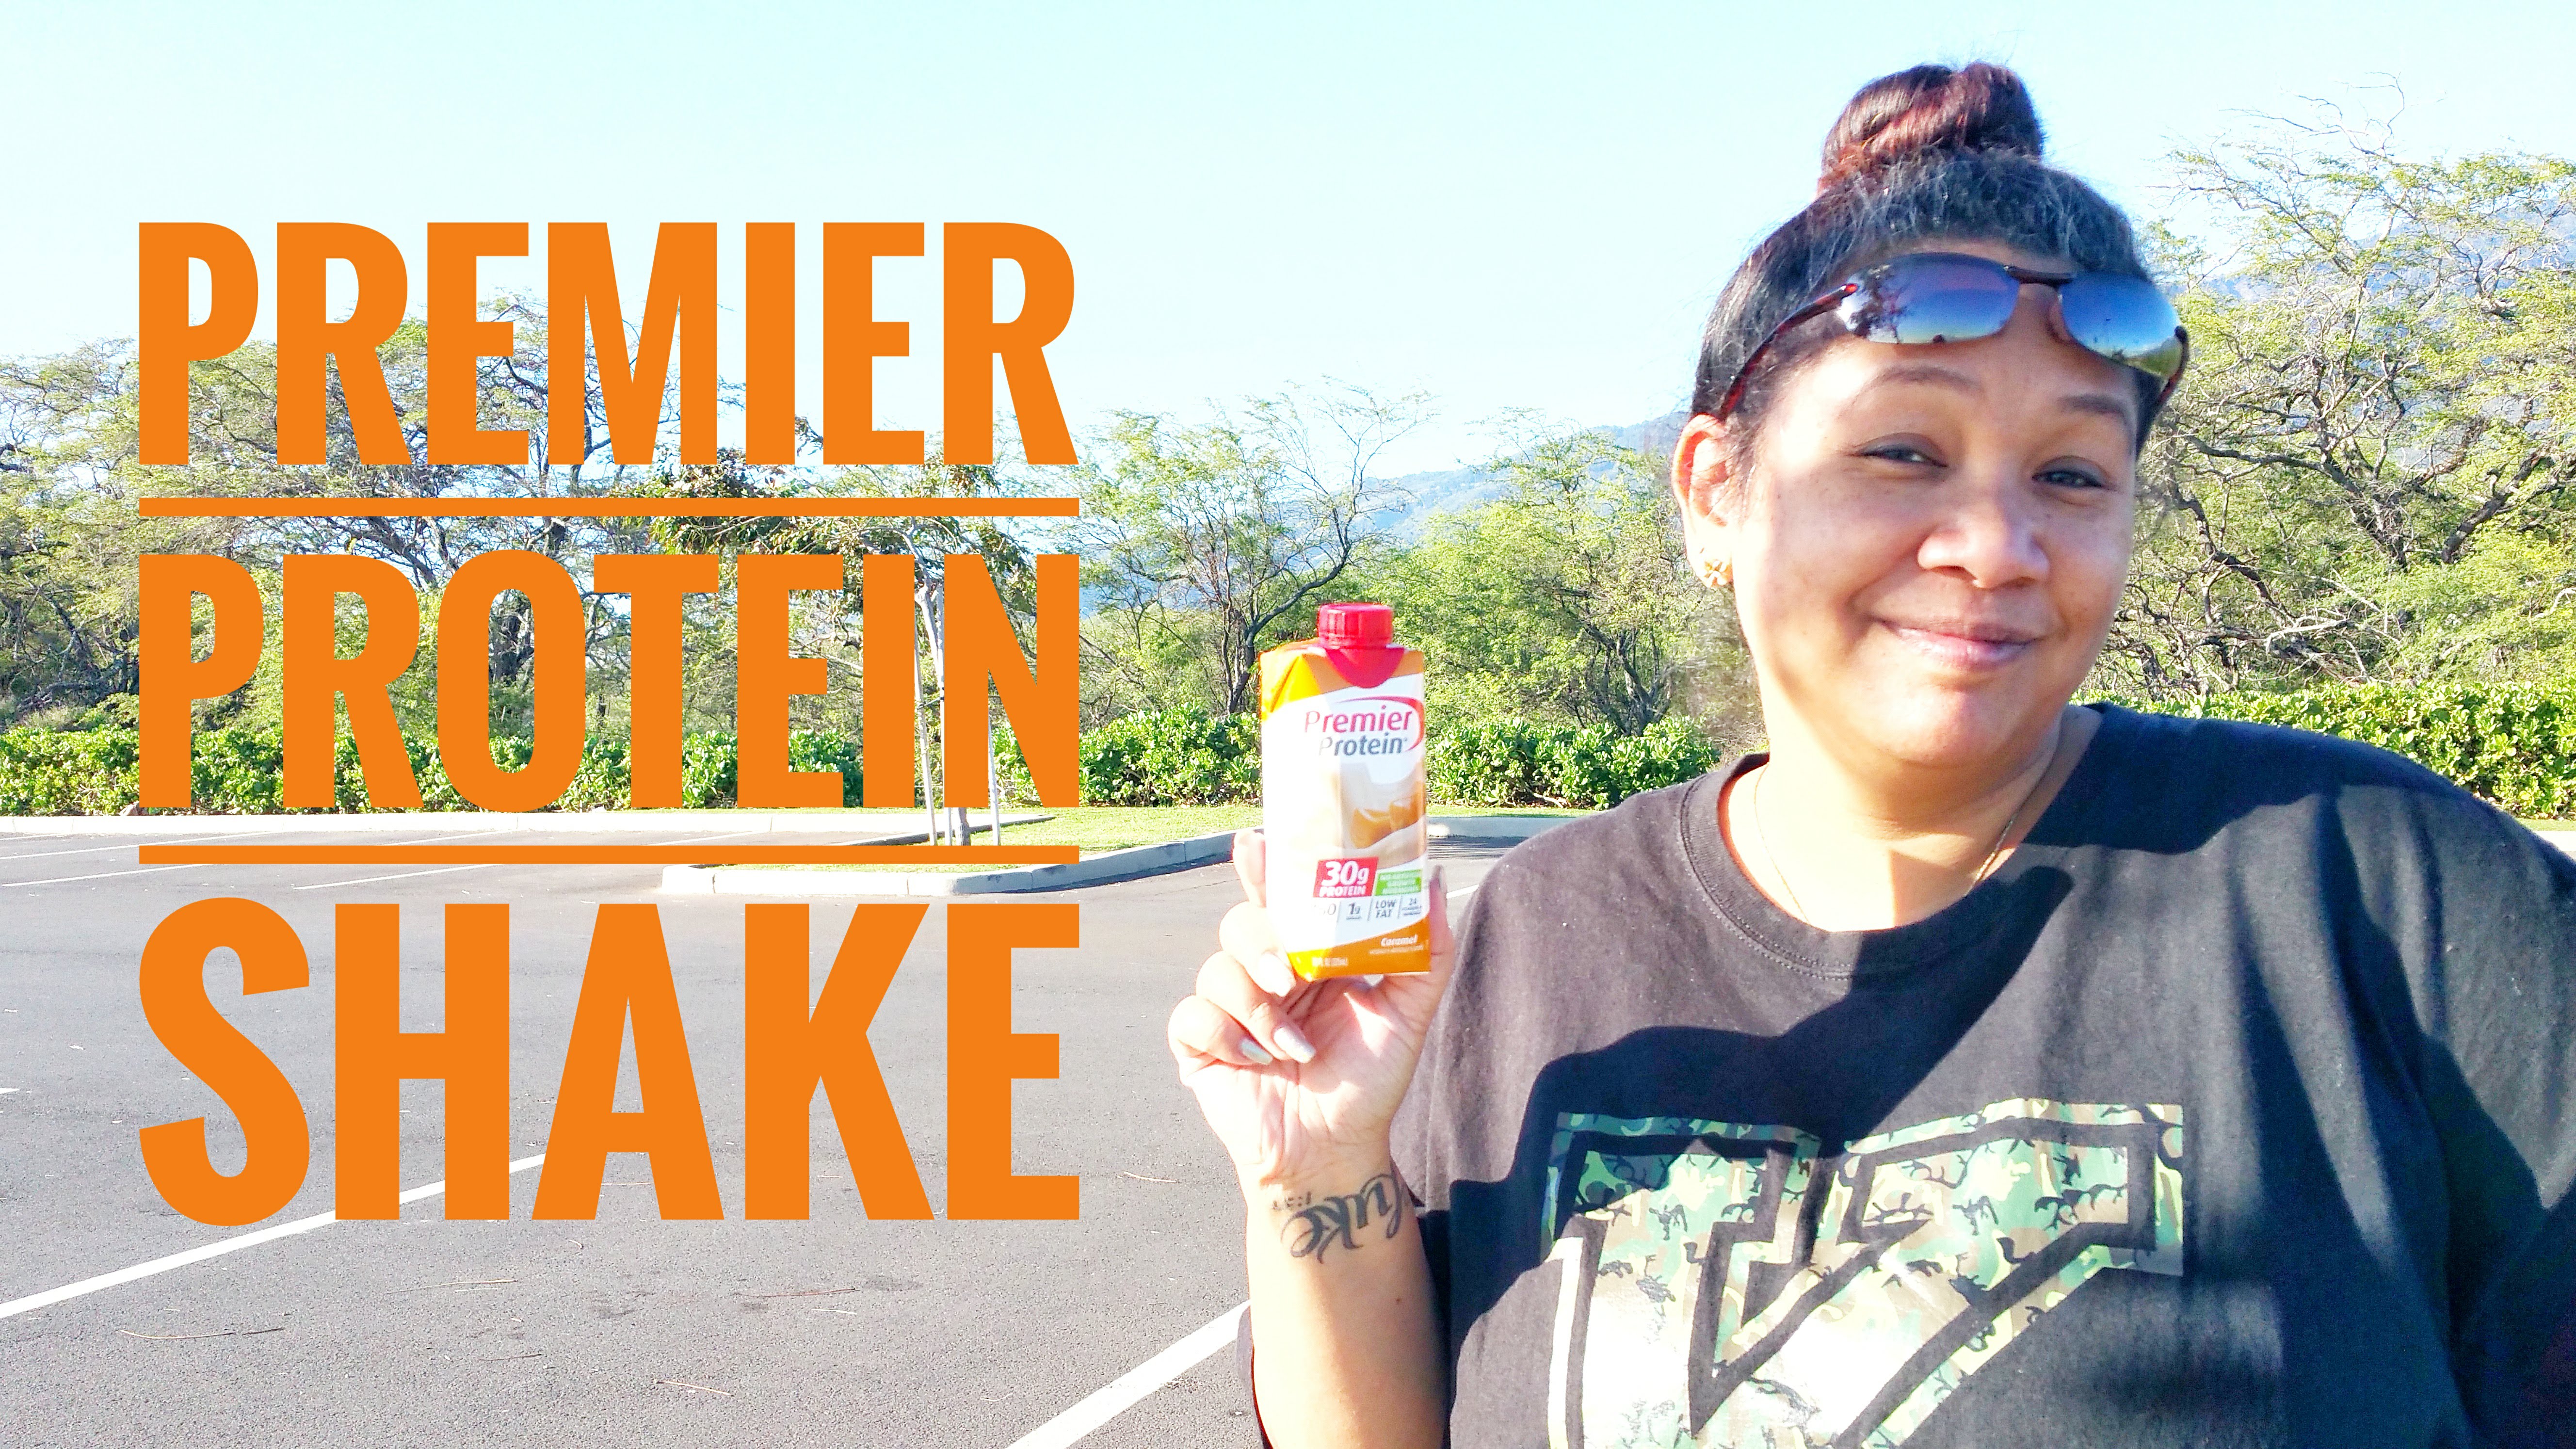 premier protein shake, premier protein, weight loss, weight loss shake, weightloss, protein shake, diet, exercise, fitness